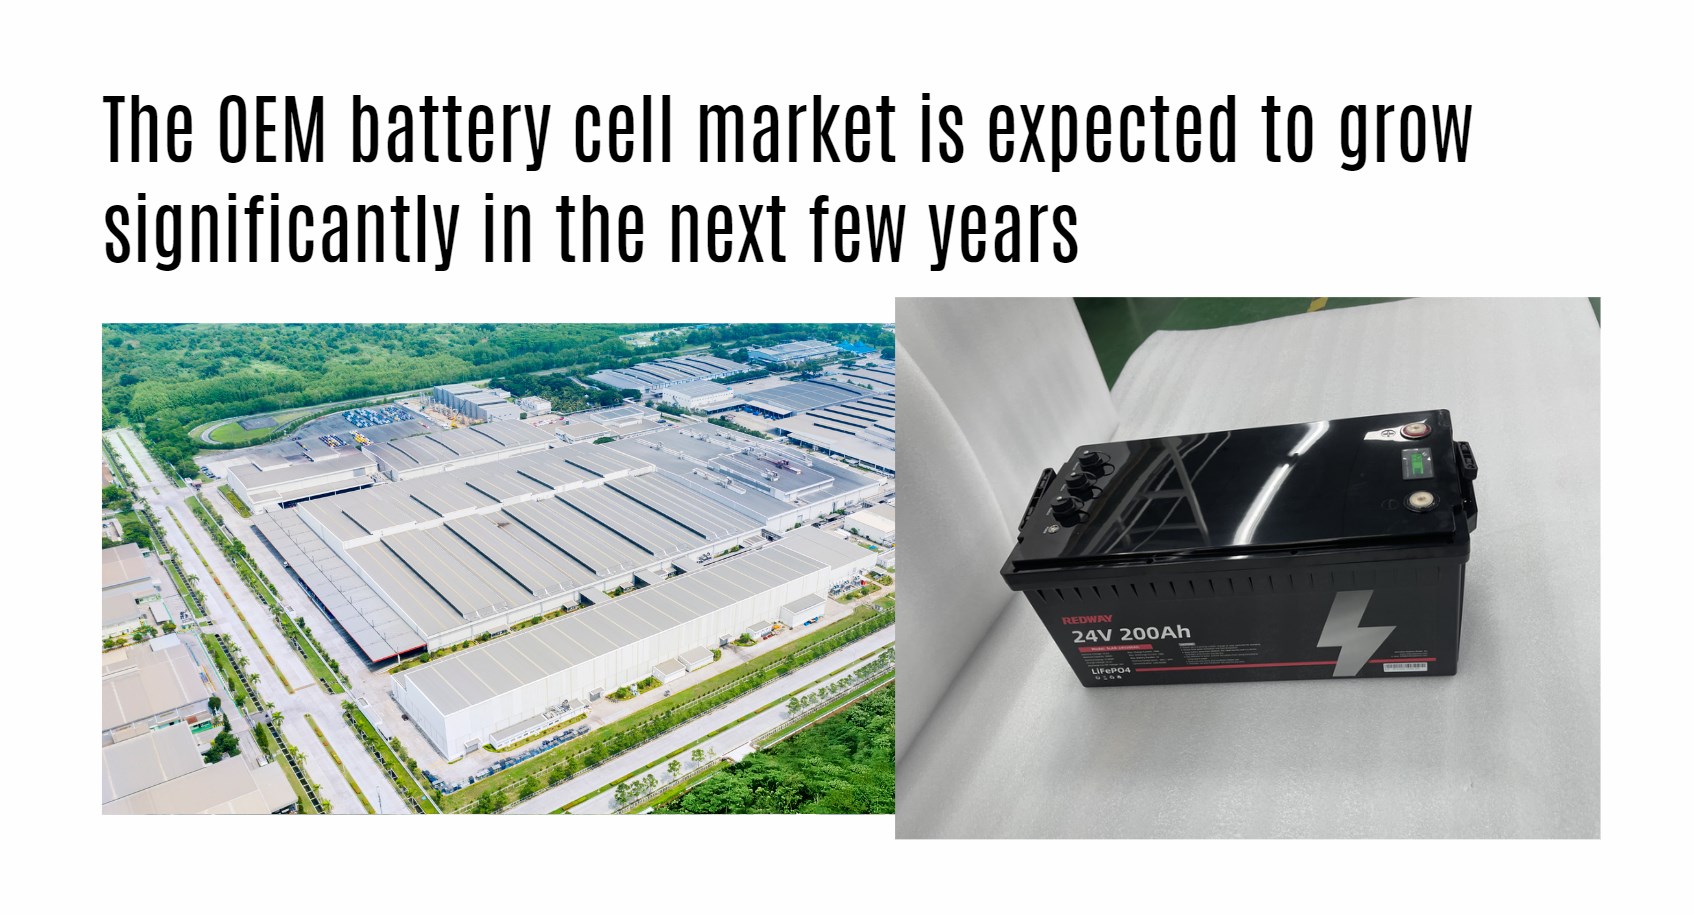 The OEM battery cell market is expected to grow significantly in the next few years. 24v 200ah lifepo4 battery factory oem